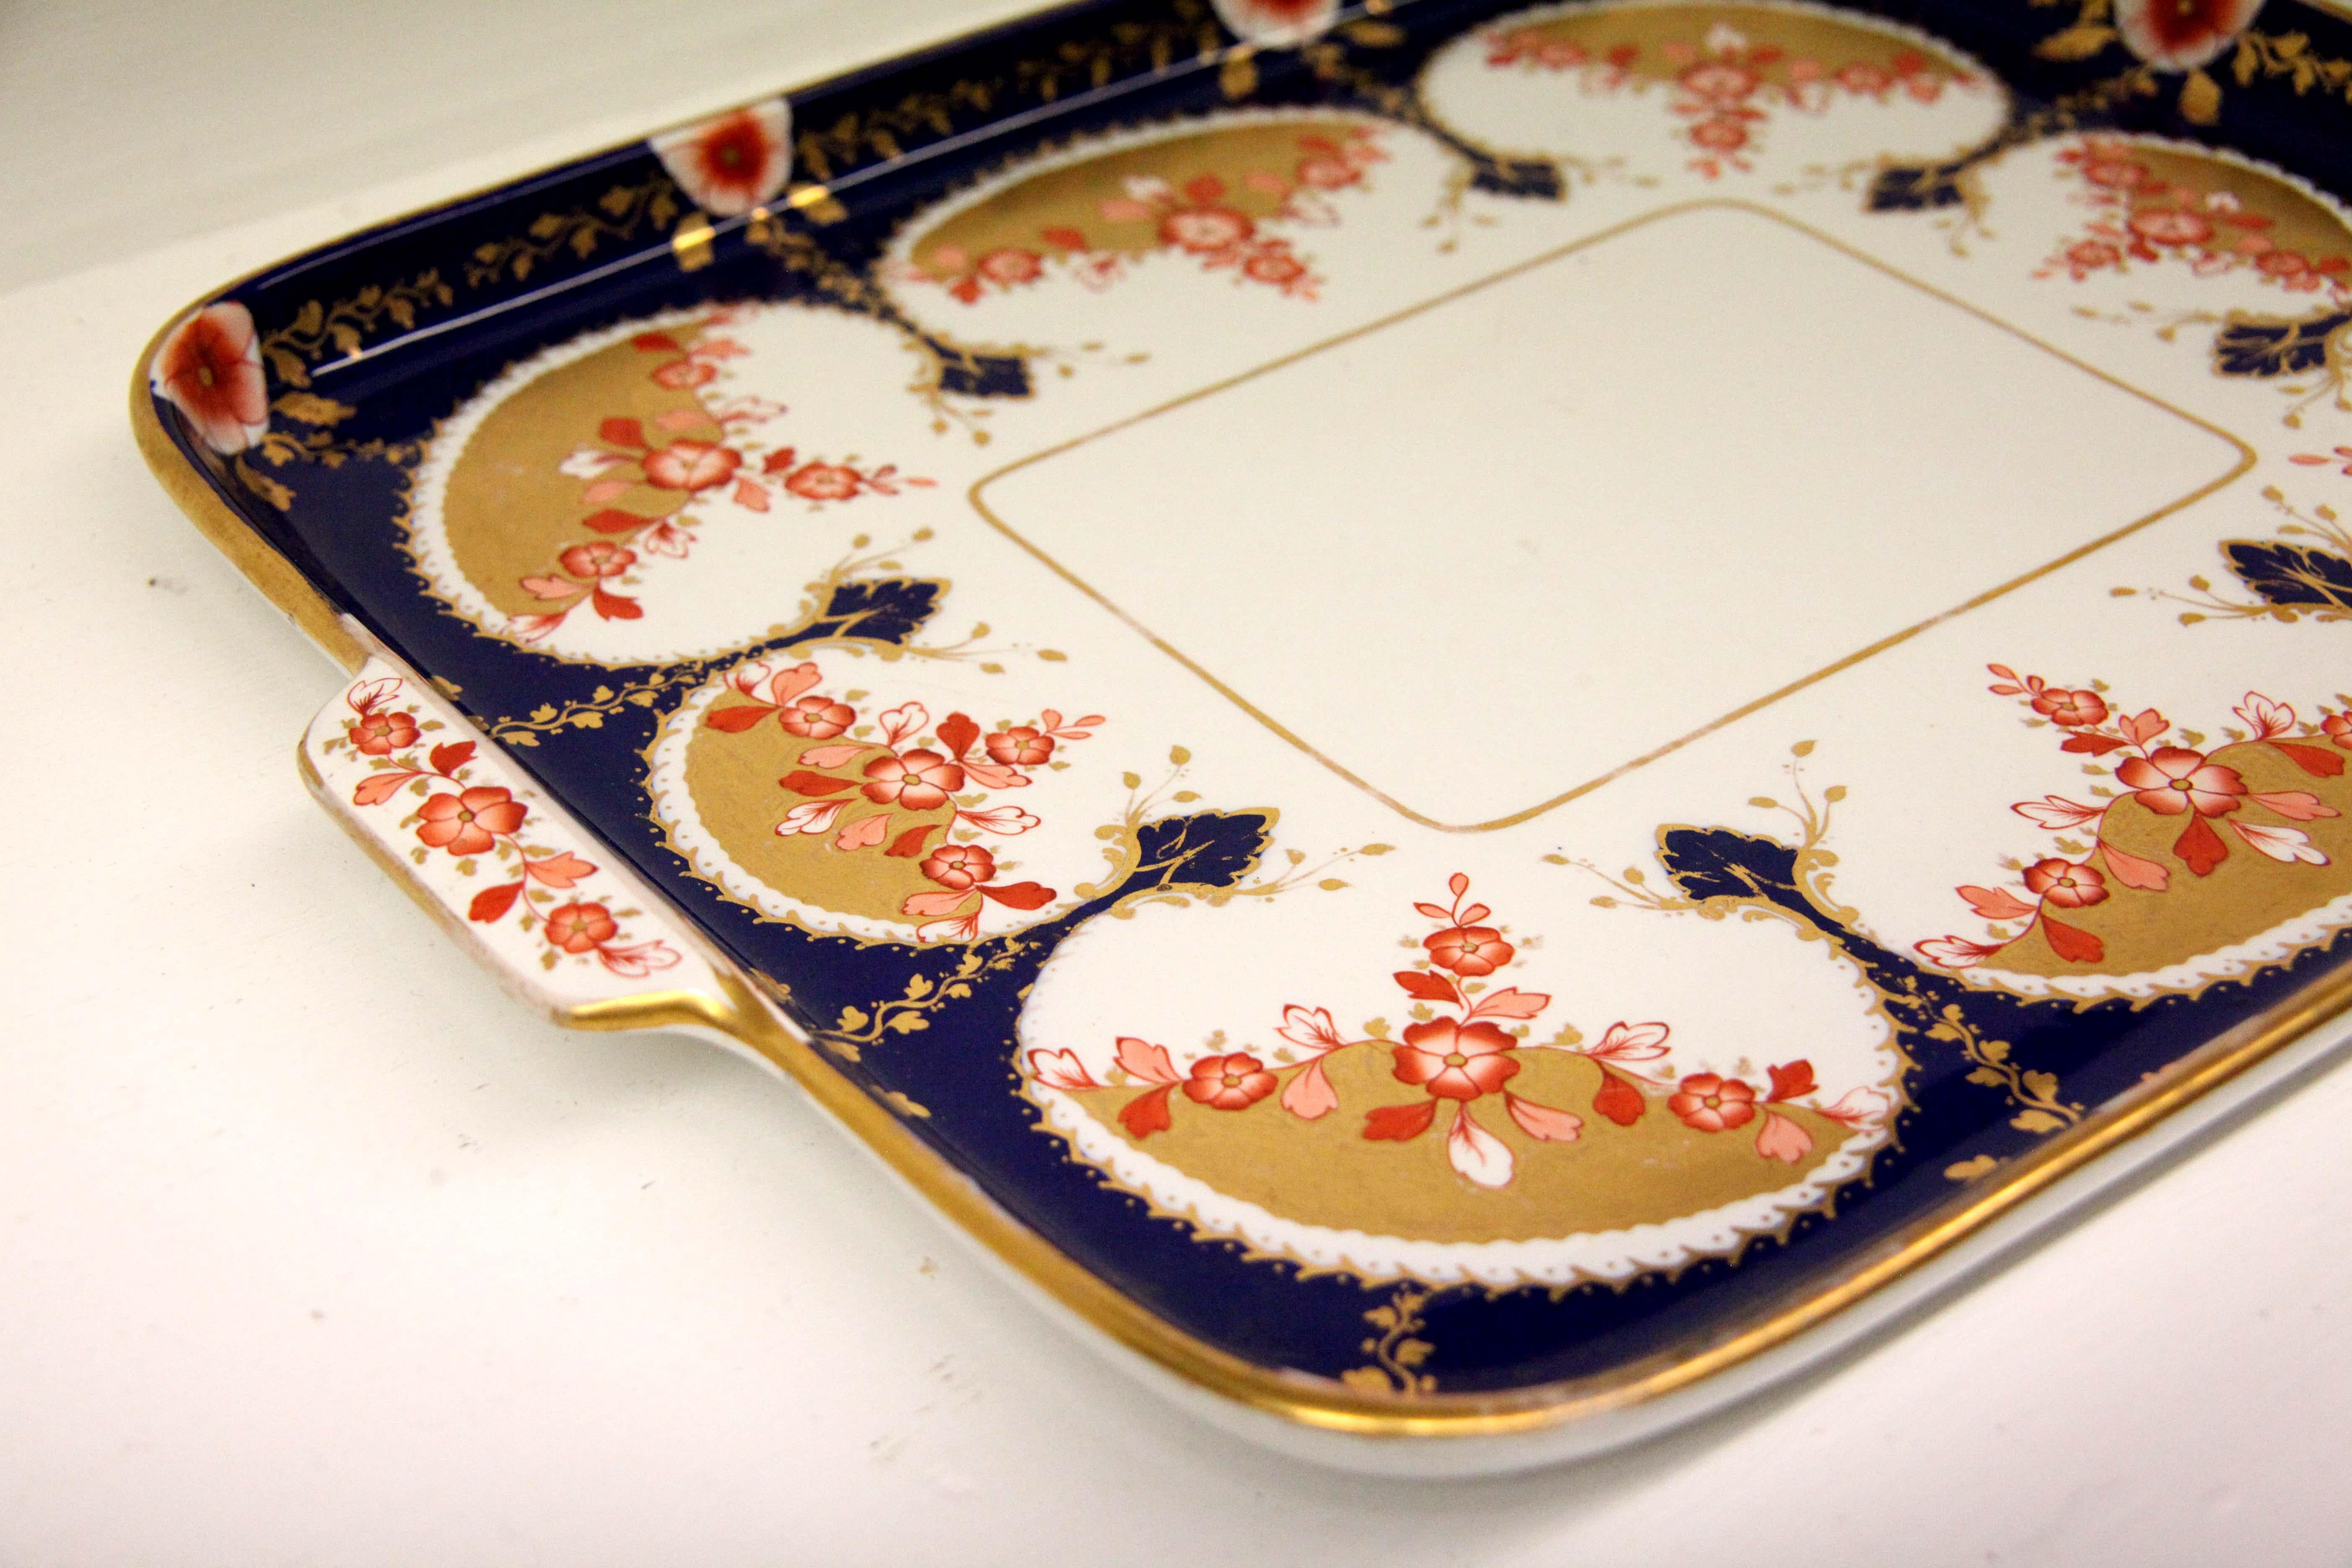 Gilt 19th Century English Copeland Porcelain Serving Tray For Sale